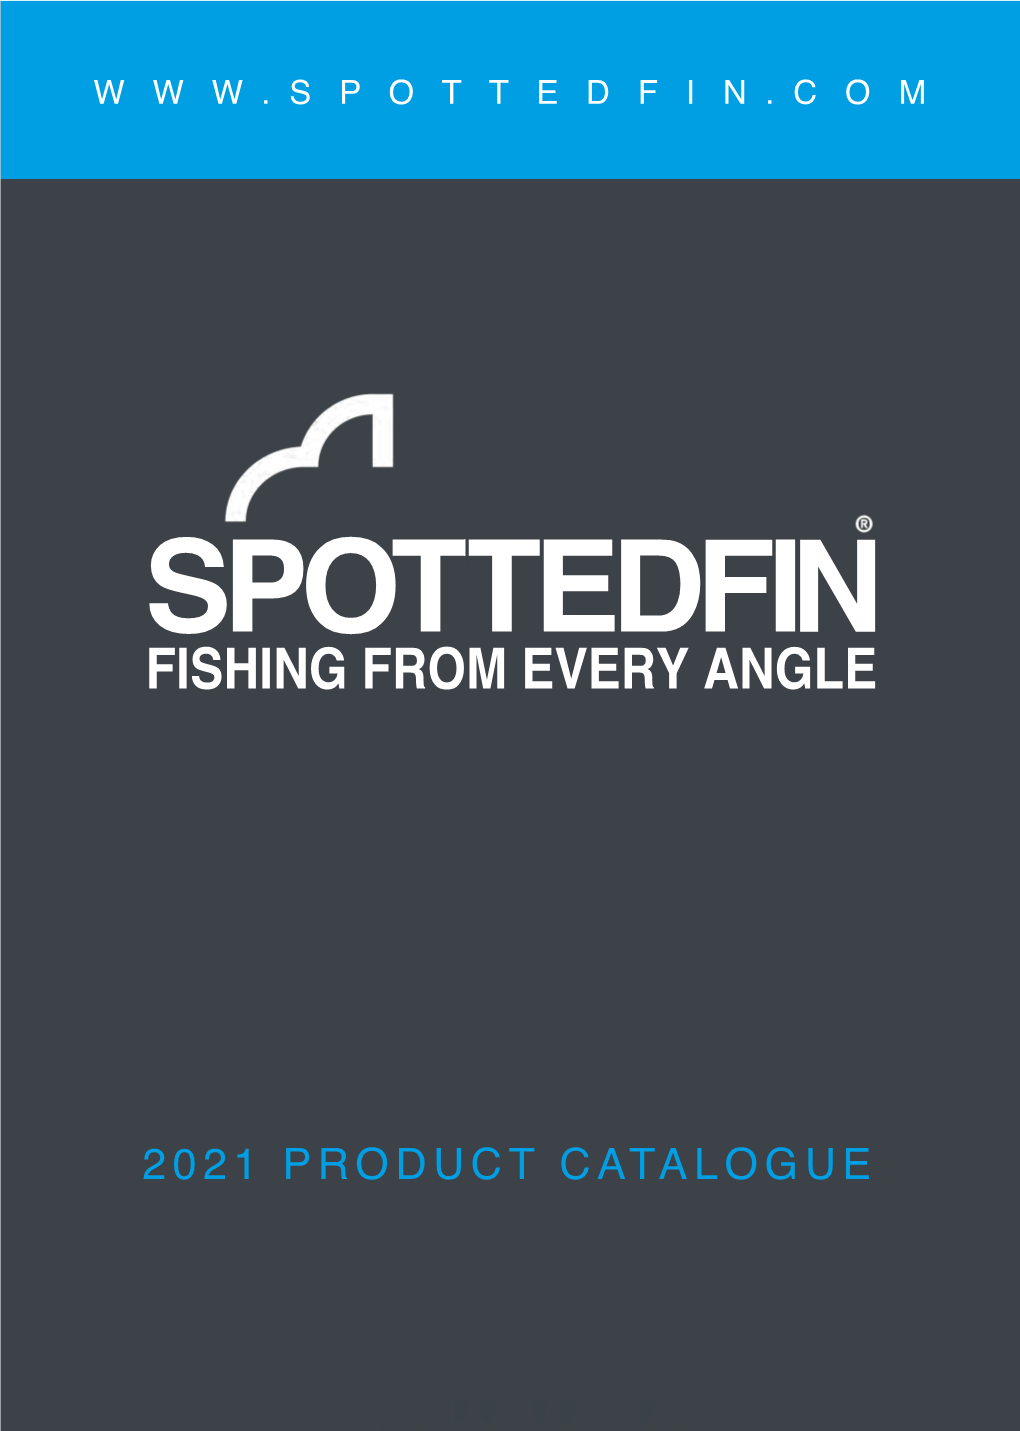 2021 PRODUCT CATALOGUE BIG on MATCH Our Popular Match Range Includes Everything an Angler Could Need Or Want SOFT HOOK PELLET in Their Bait Box